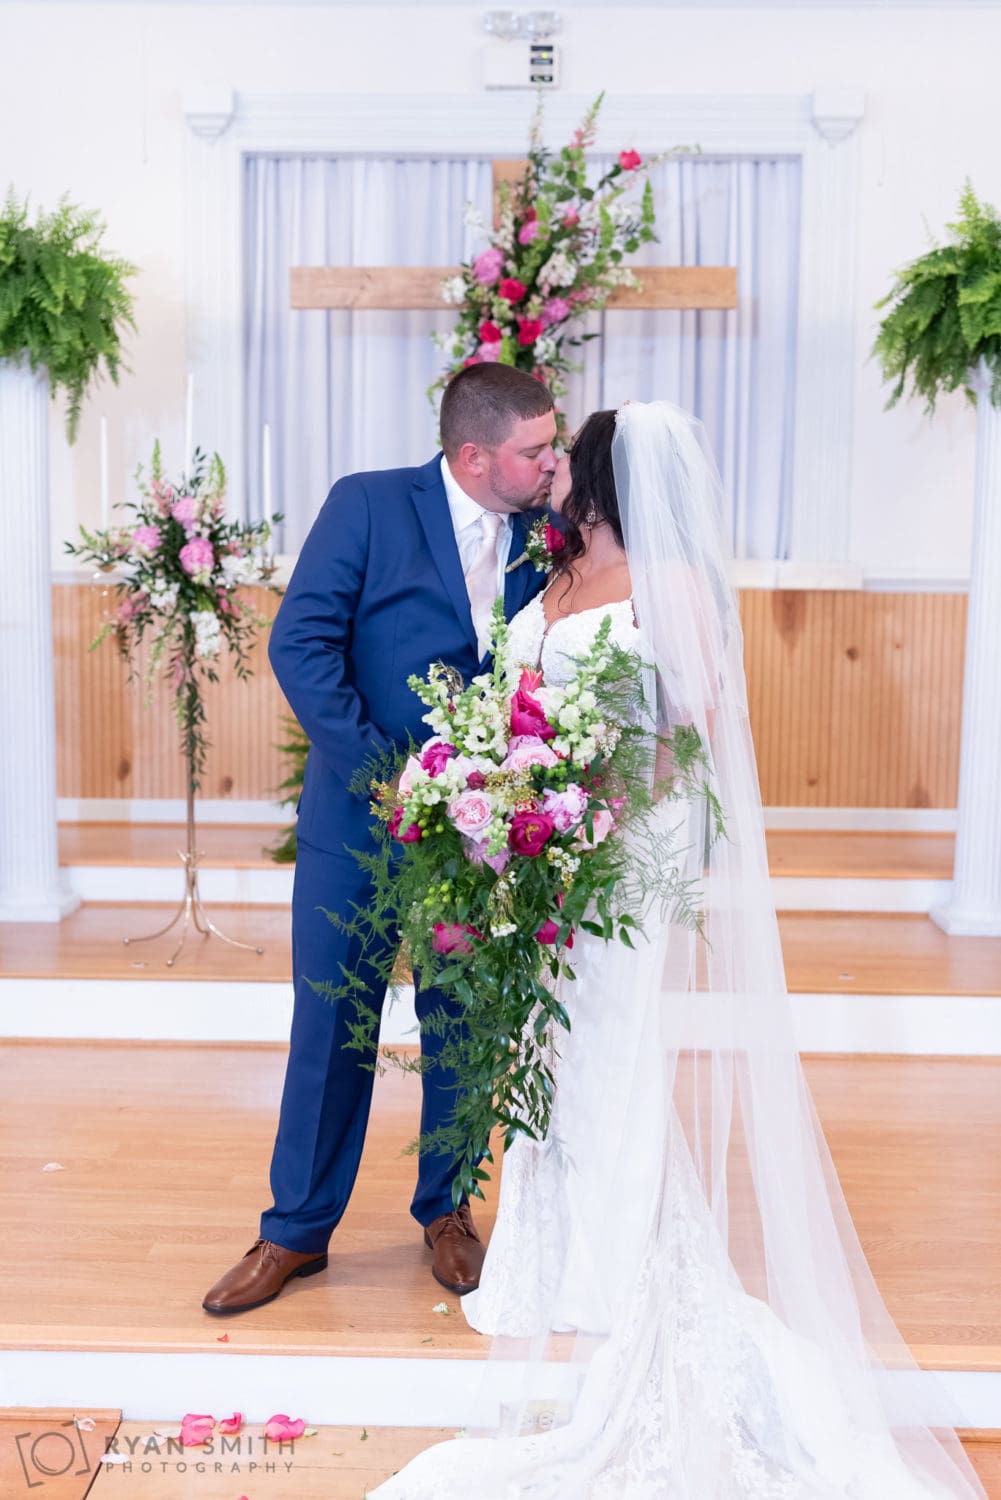 Kiss after the ceremony - Hidden Acres